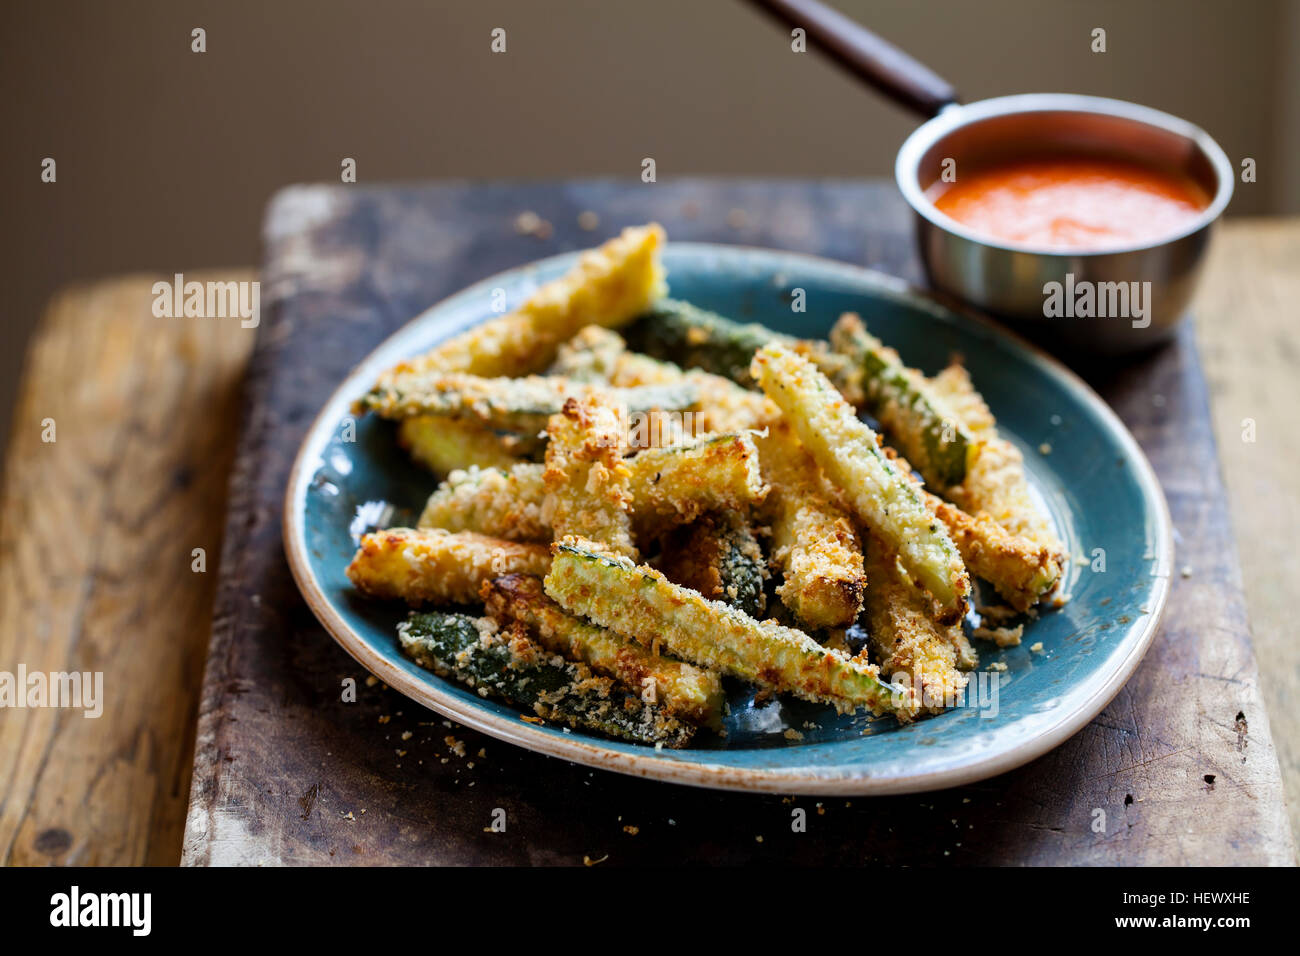 Zucchini fires with roast pepper and tomato sauce Stock Photo